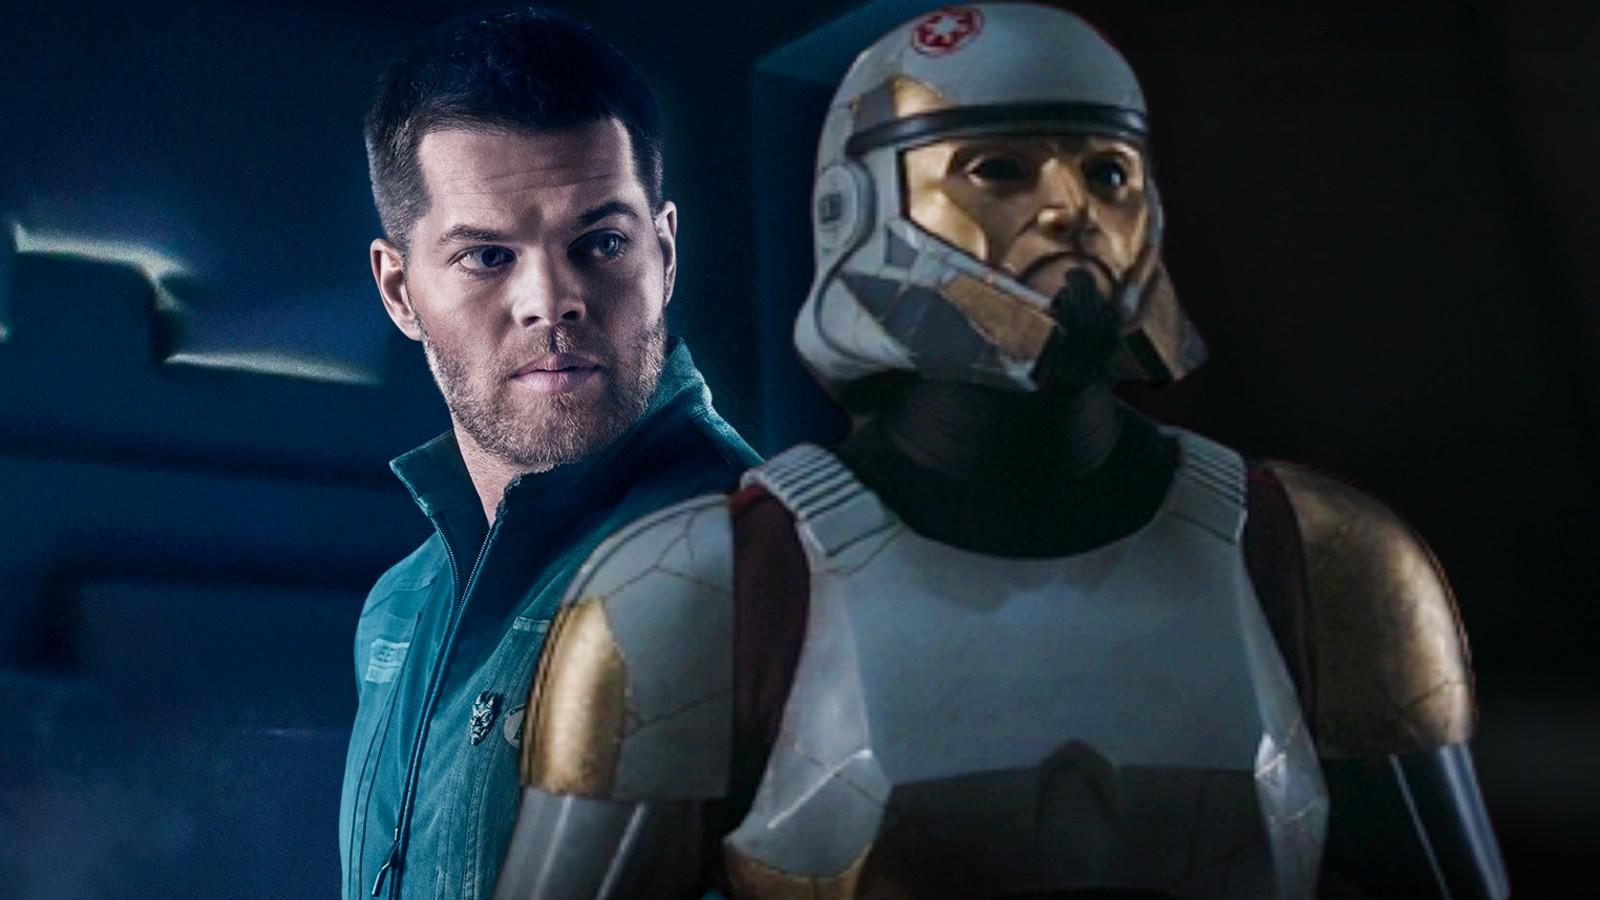 Wes Chatham in The Expanse and Captain Enoch in Ahsoka